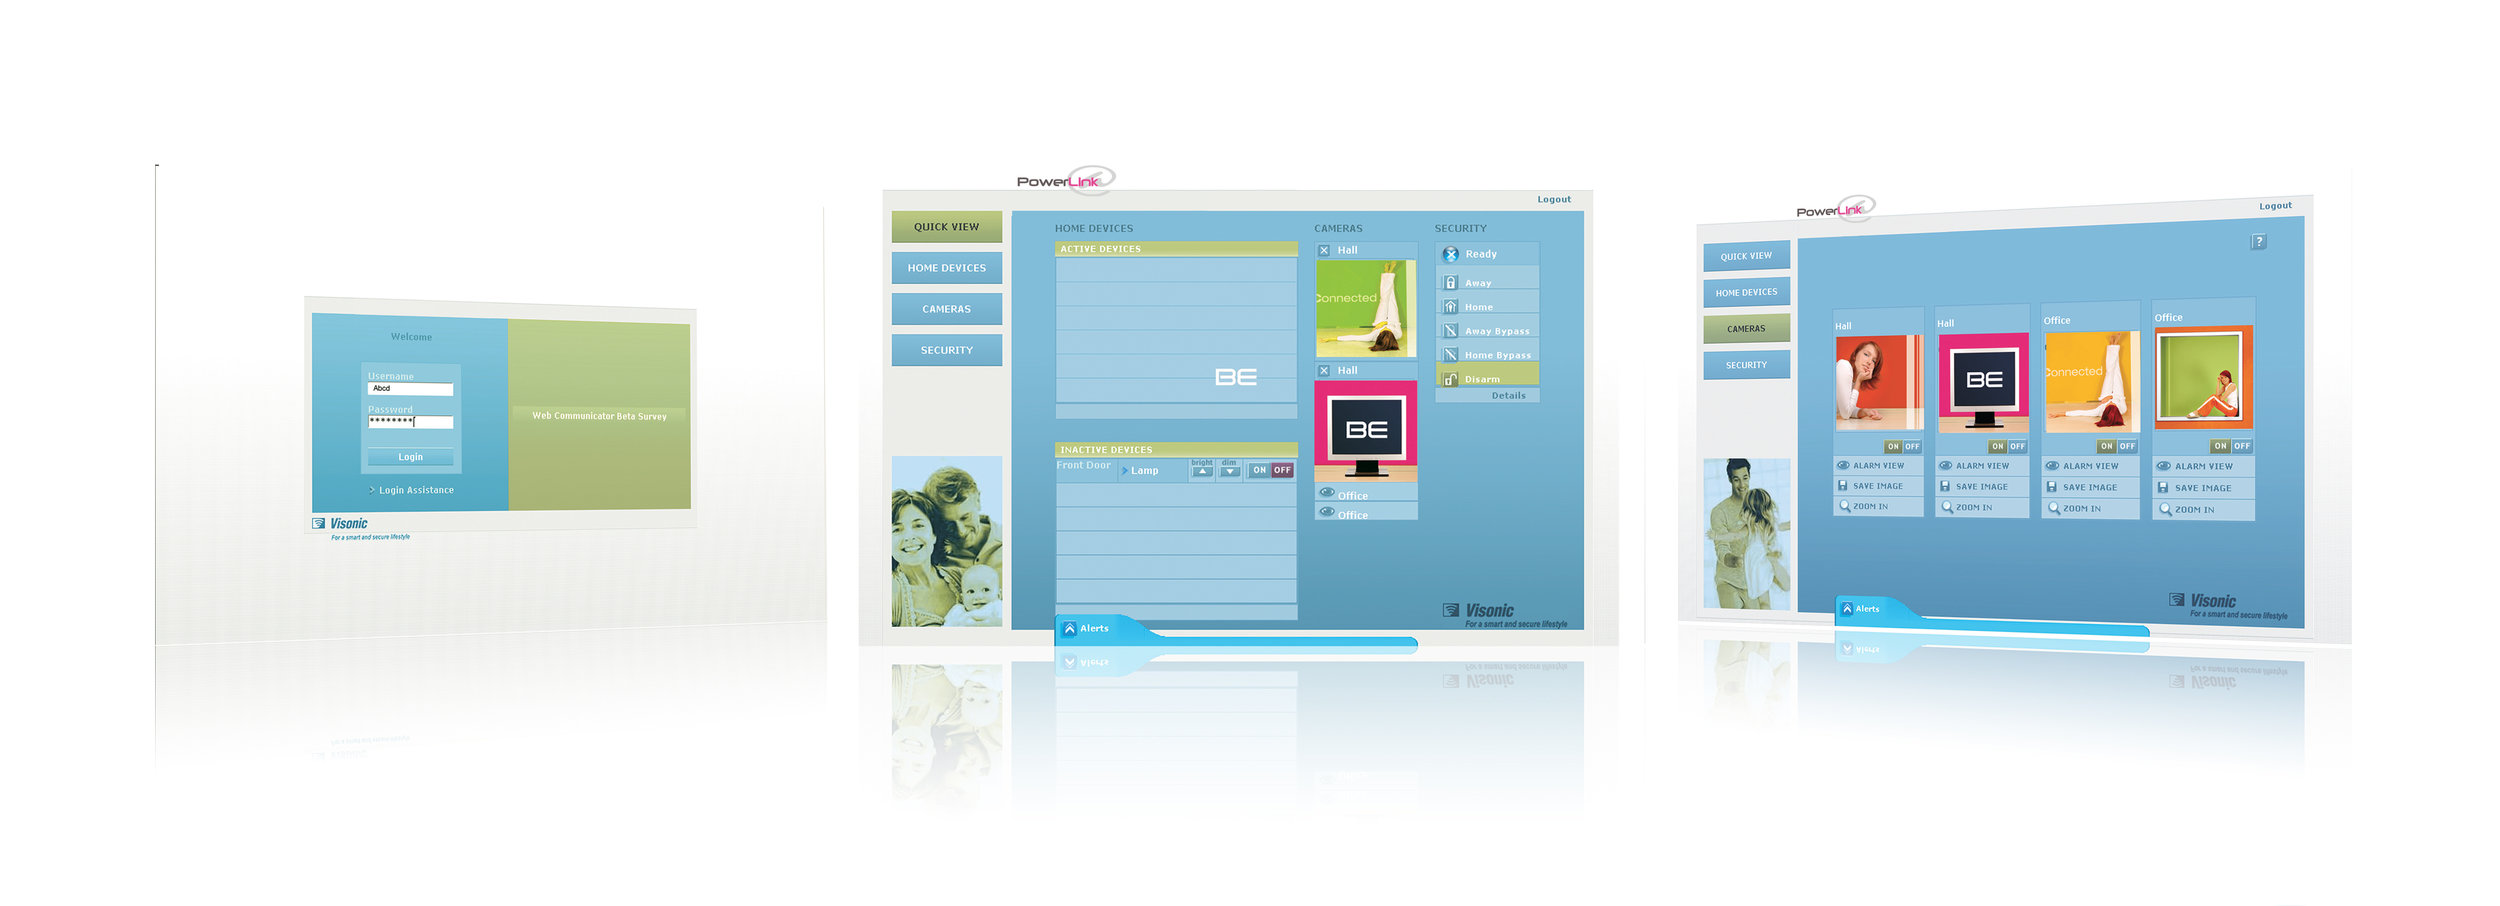 PowerLink Product Launch- Application screens 